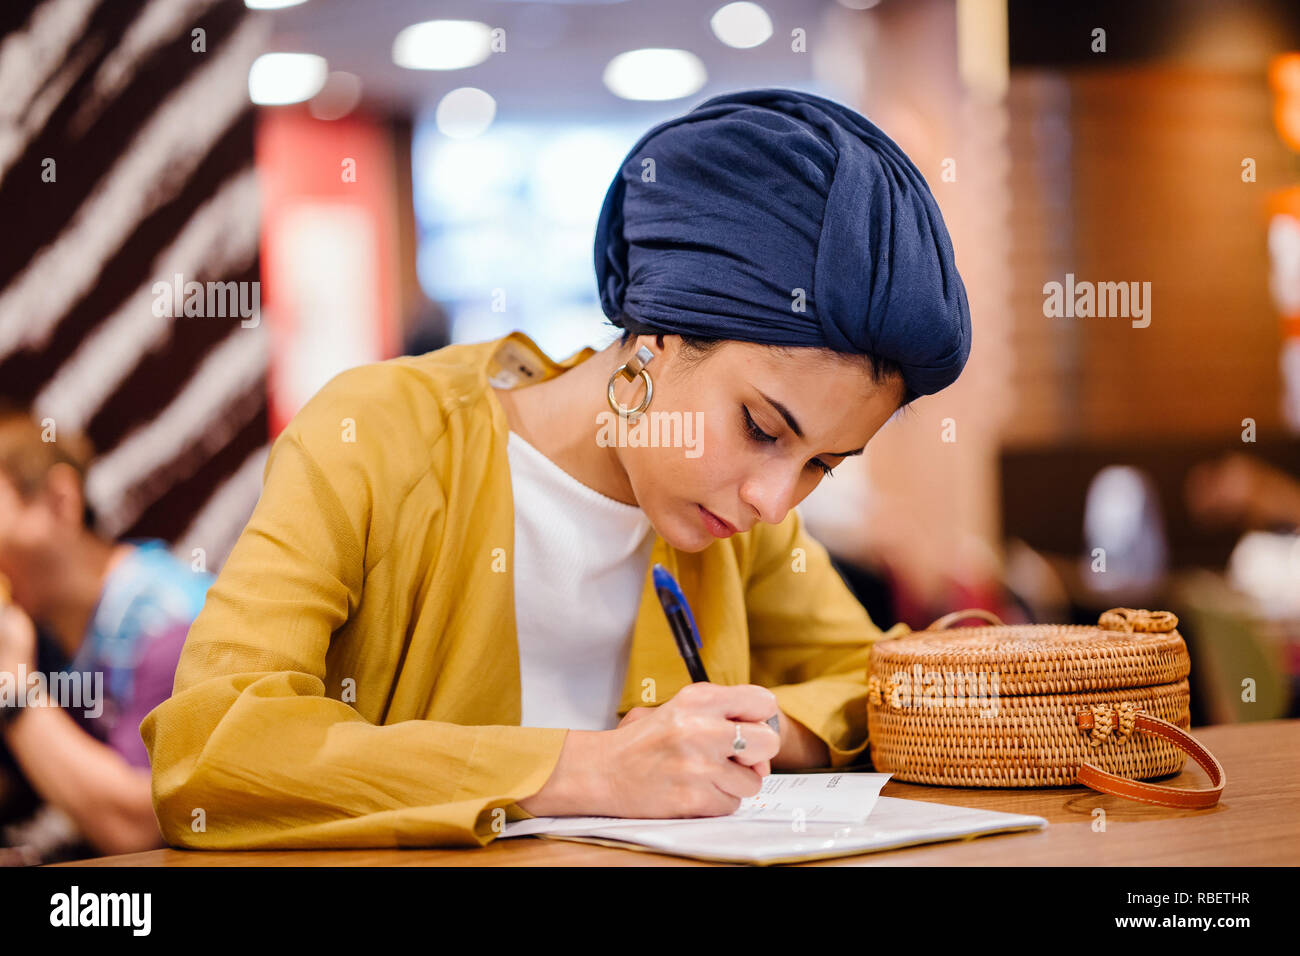 Portrait of a beautiful and elegant Middle Eastern woman writing in her journal notebook. She is wearing a blue turban hijab headscarf. Stock Photo